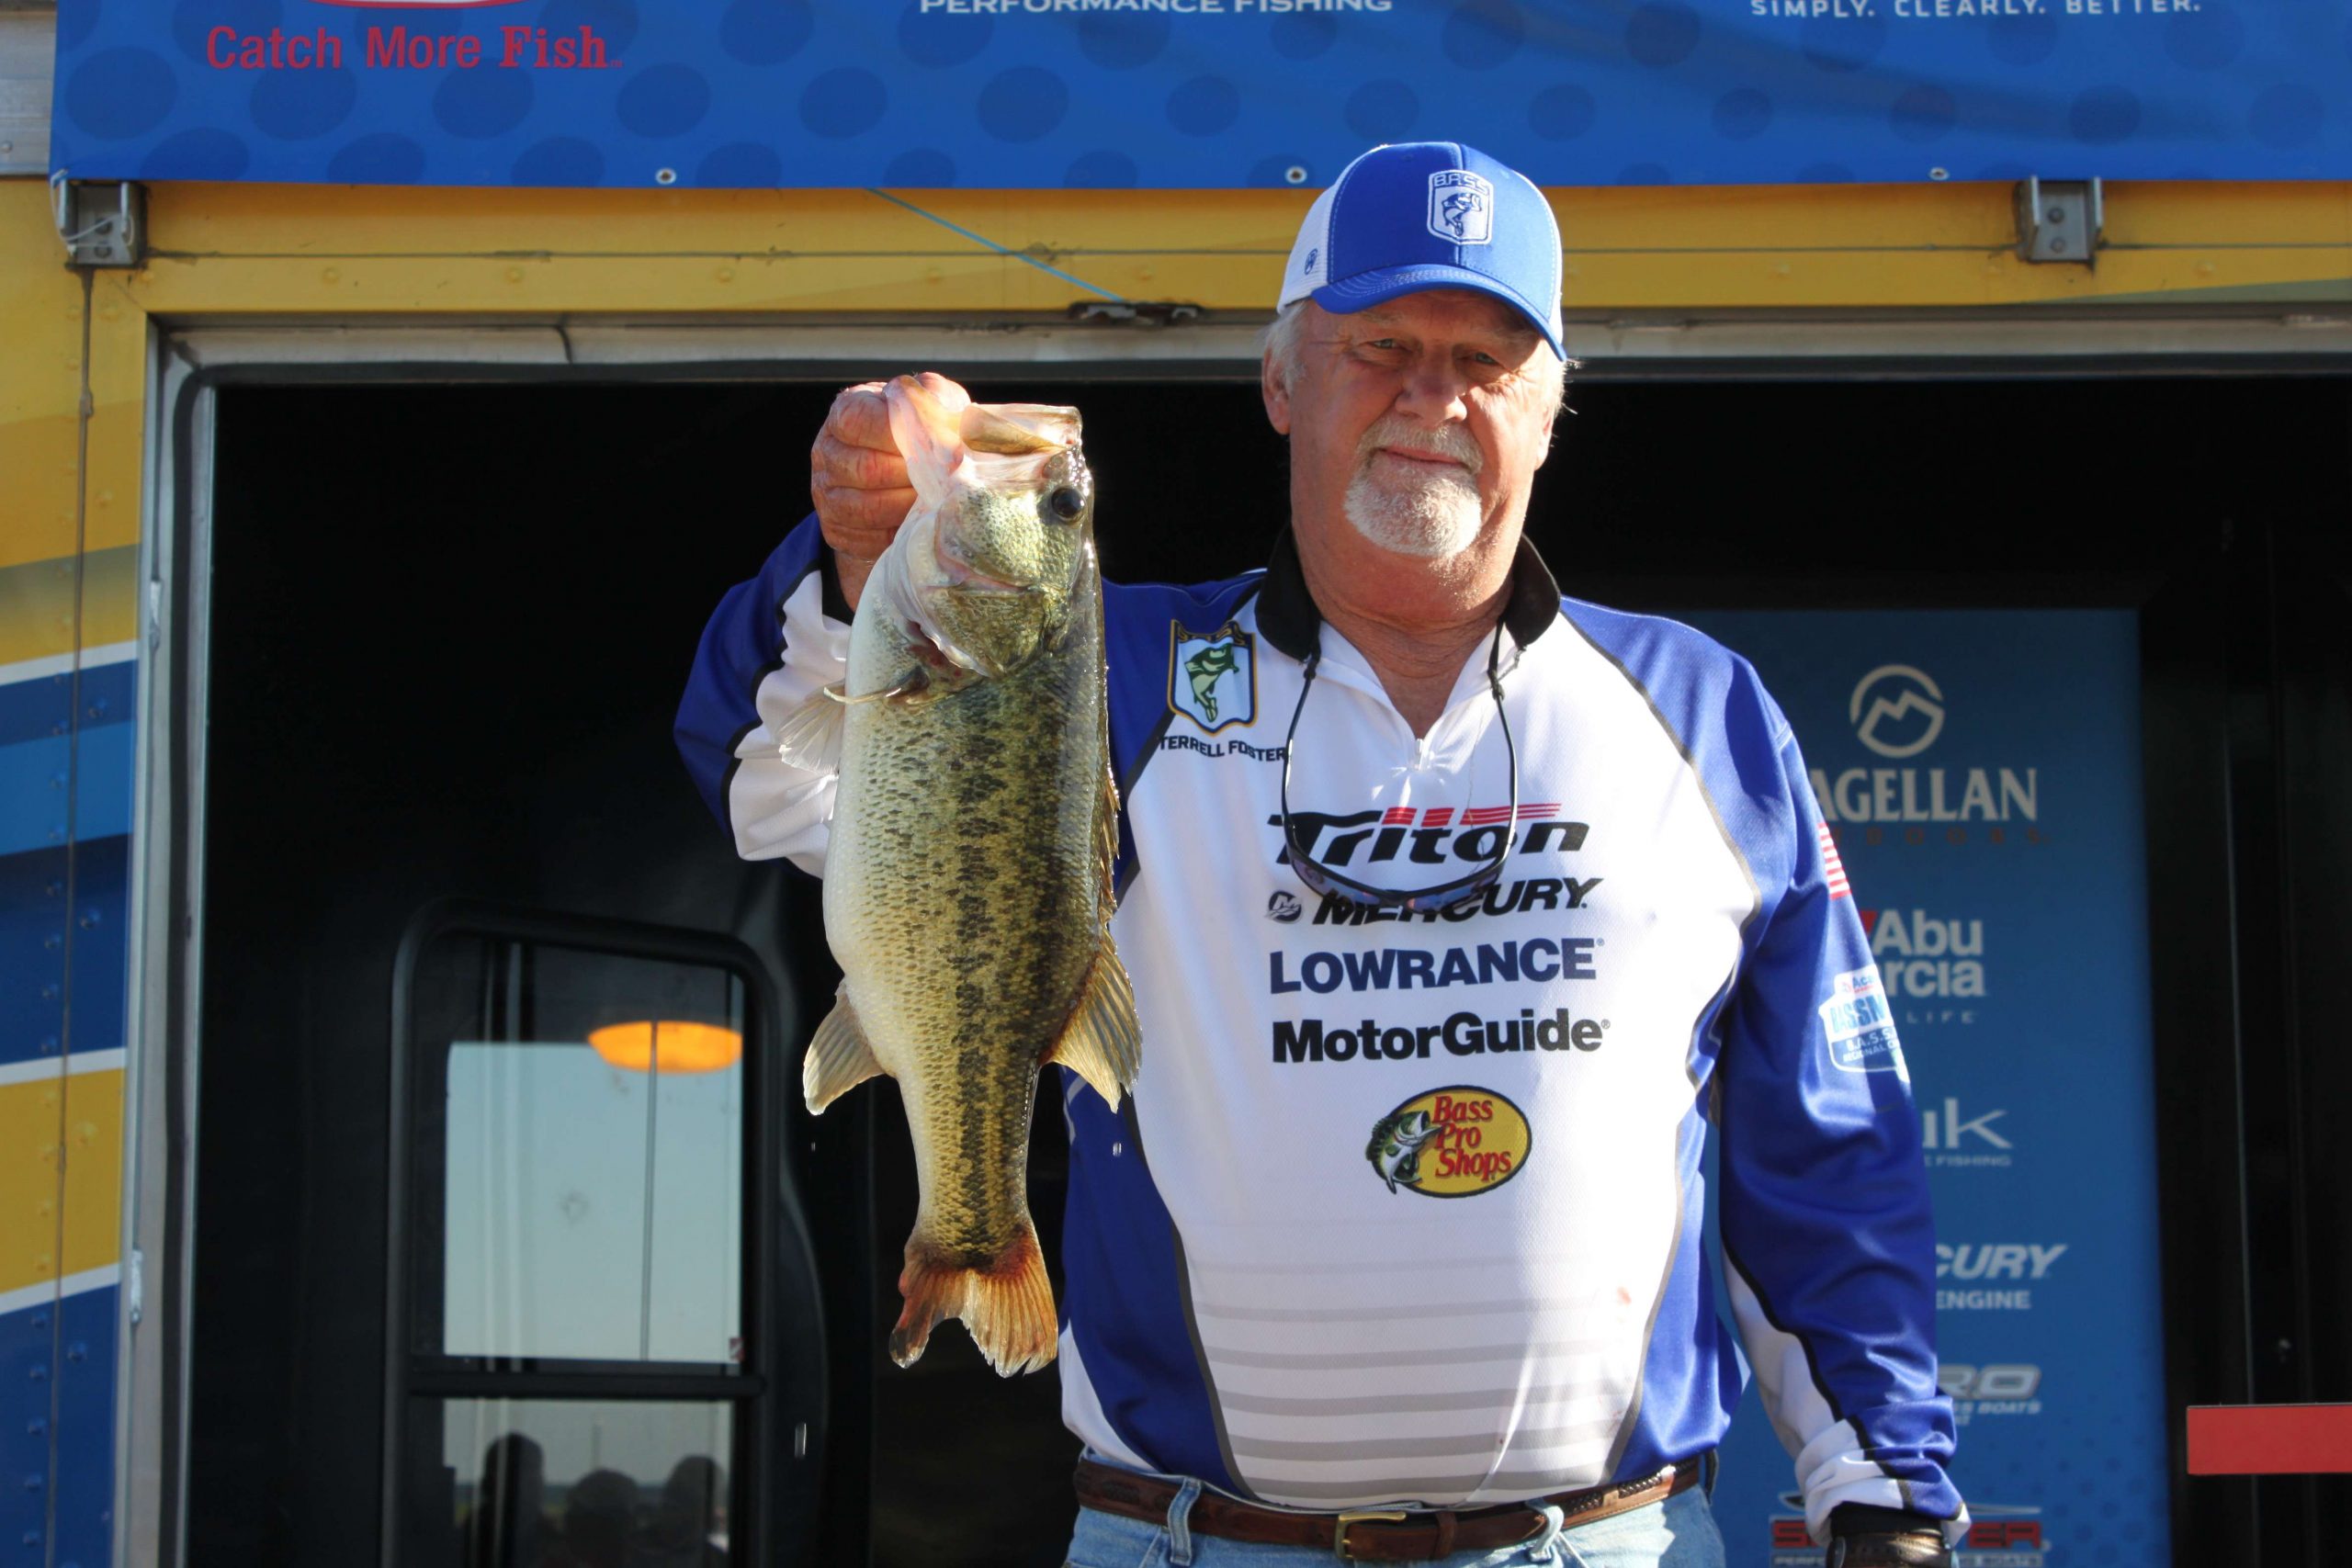 Terrell Foster of Team Mississippi did his state proud with five bass weighing 16-10. Heâs in 13th place among boaters after Day 1.